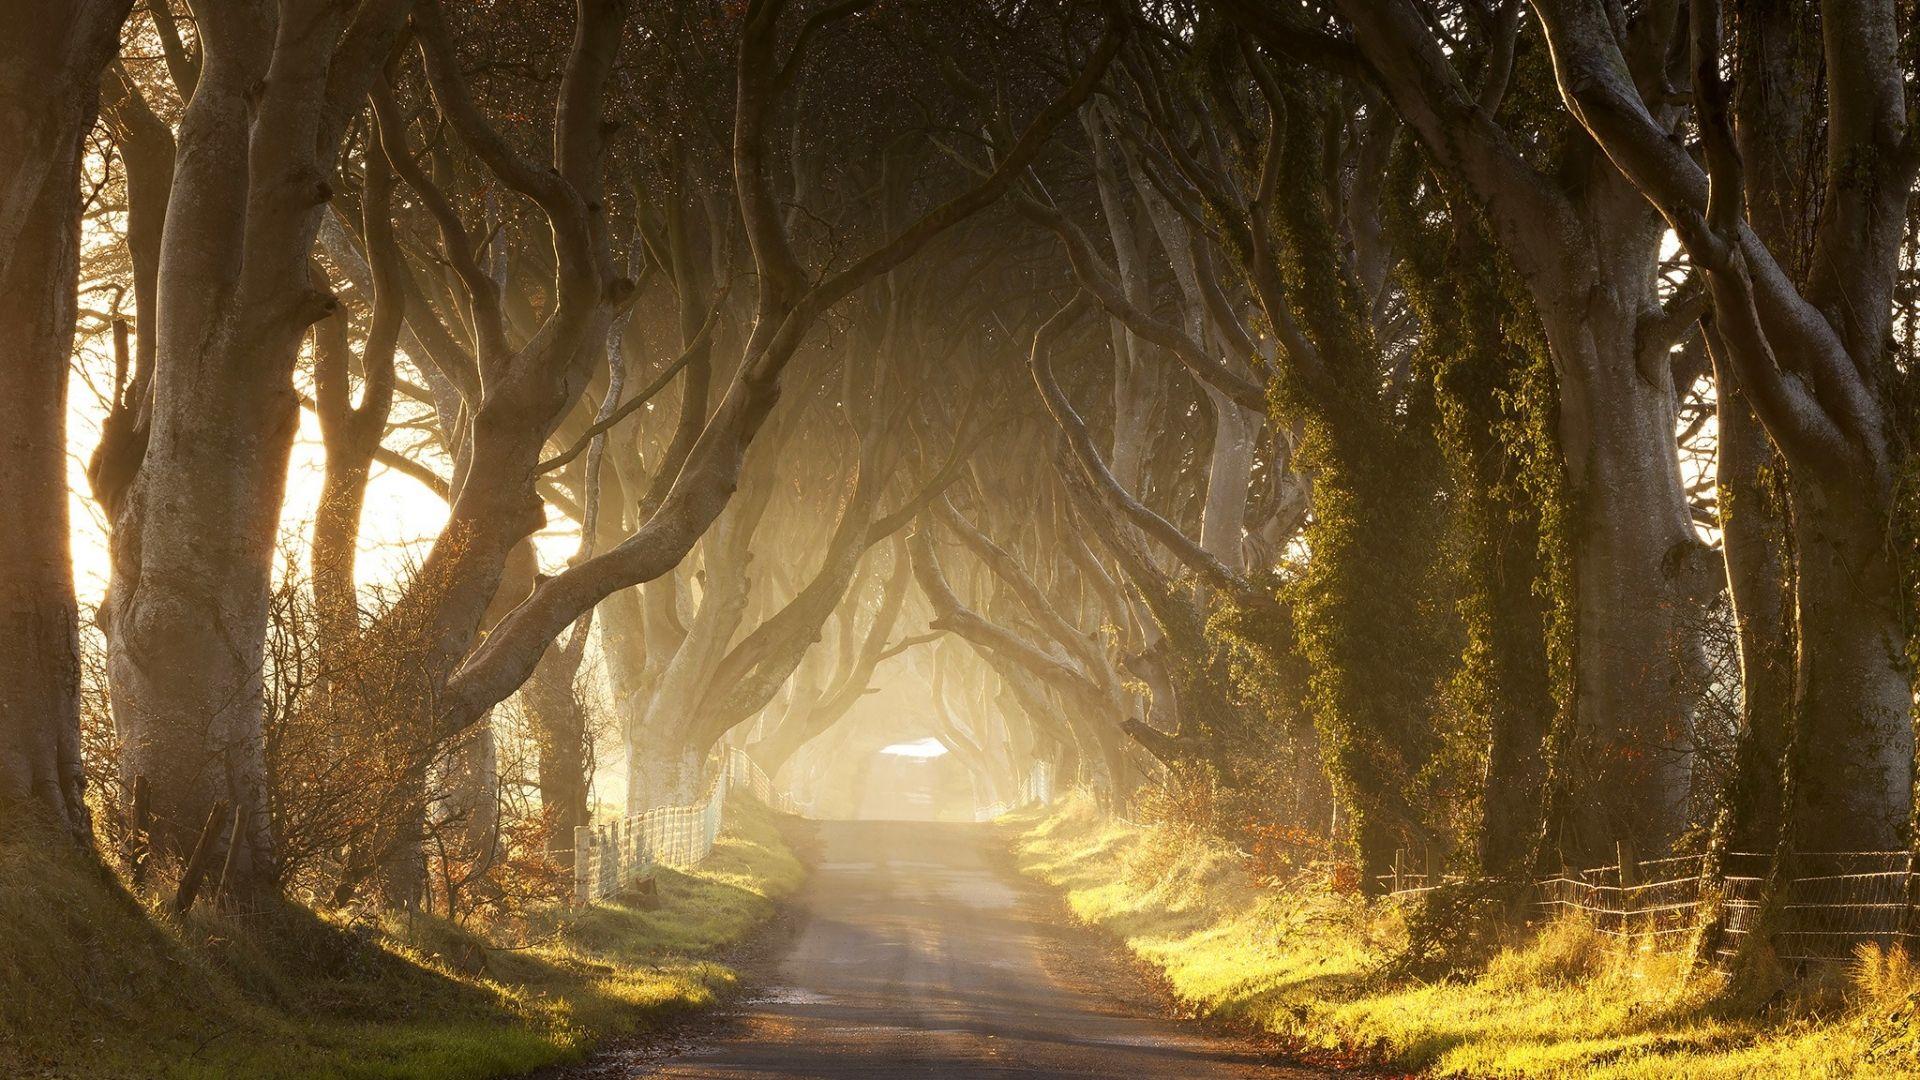 Game of Thrones Scenery Wallpapers - Top Free Game of Thrones Scenery